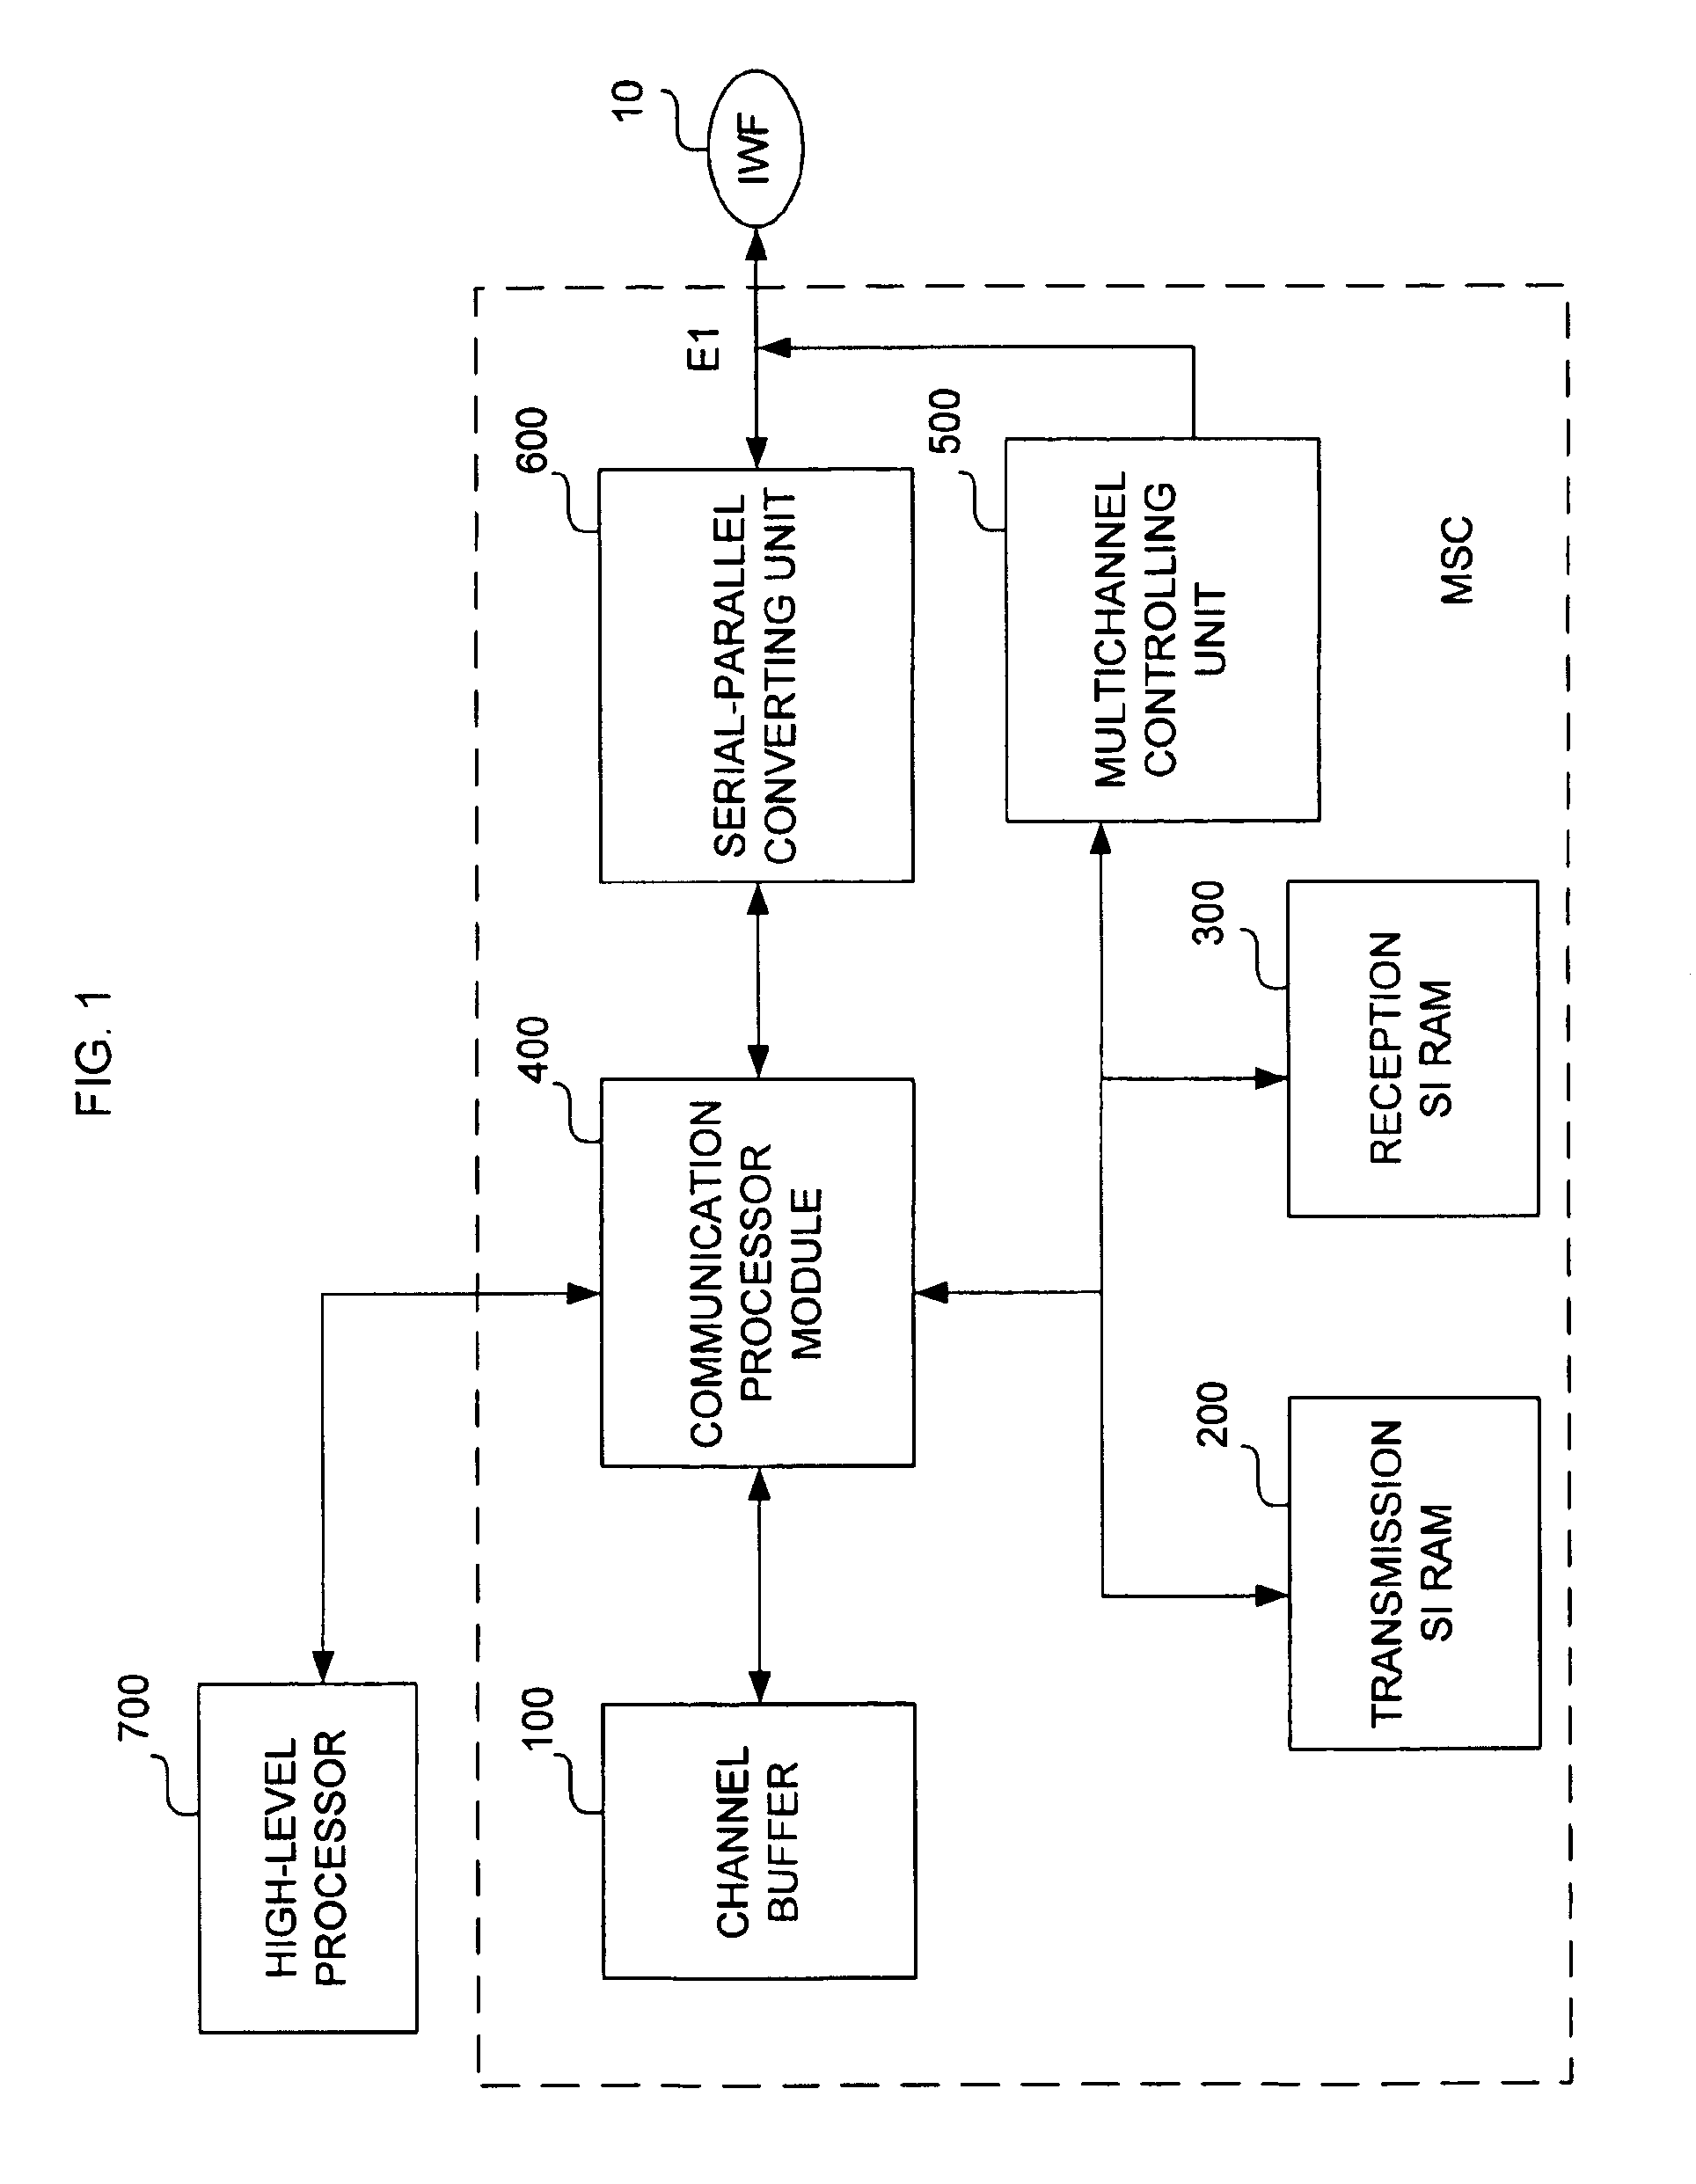 Apparatus and method for allocating channel between MSC and IWF unit in CDMA mobile communication system